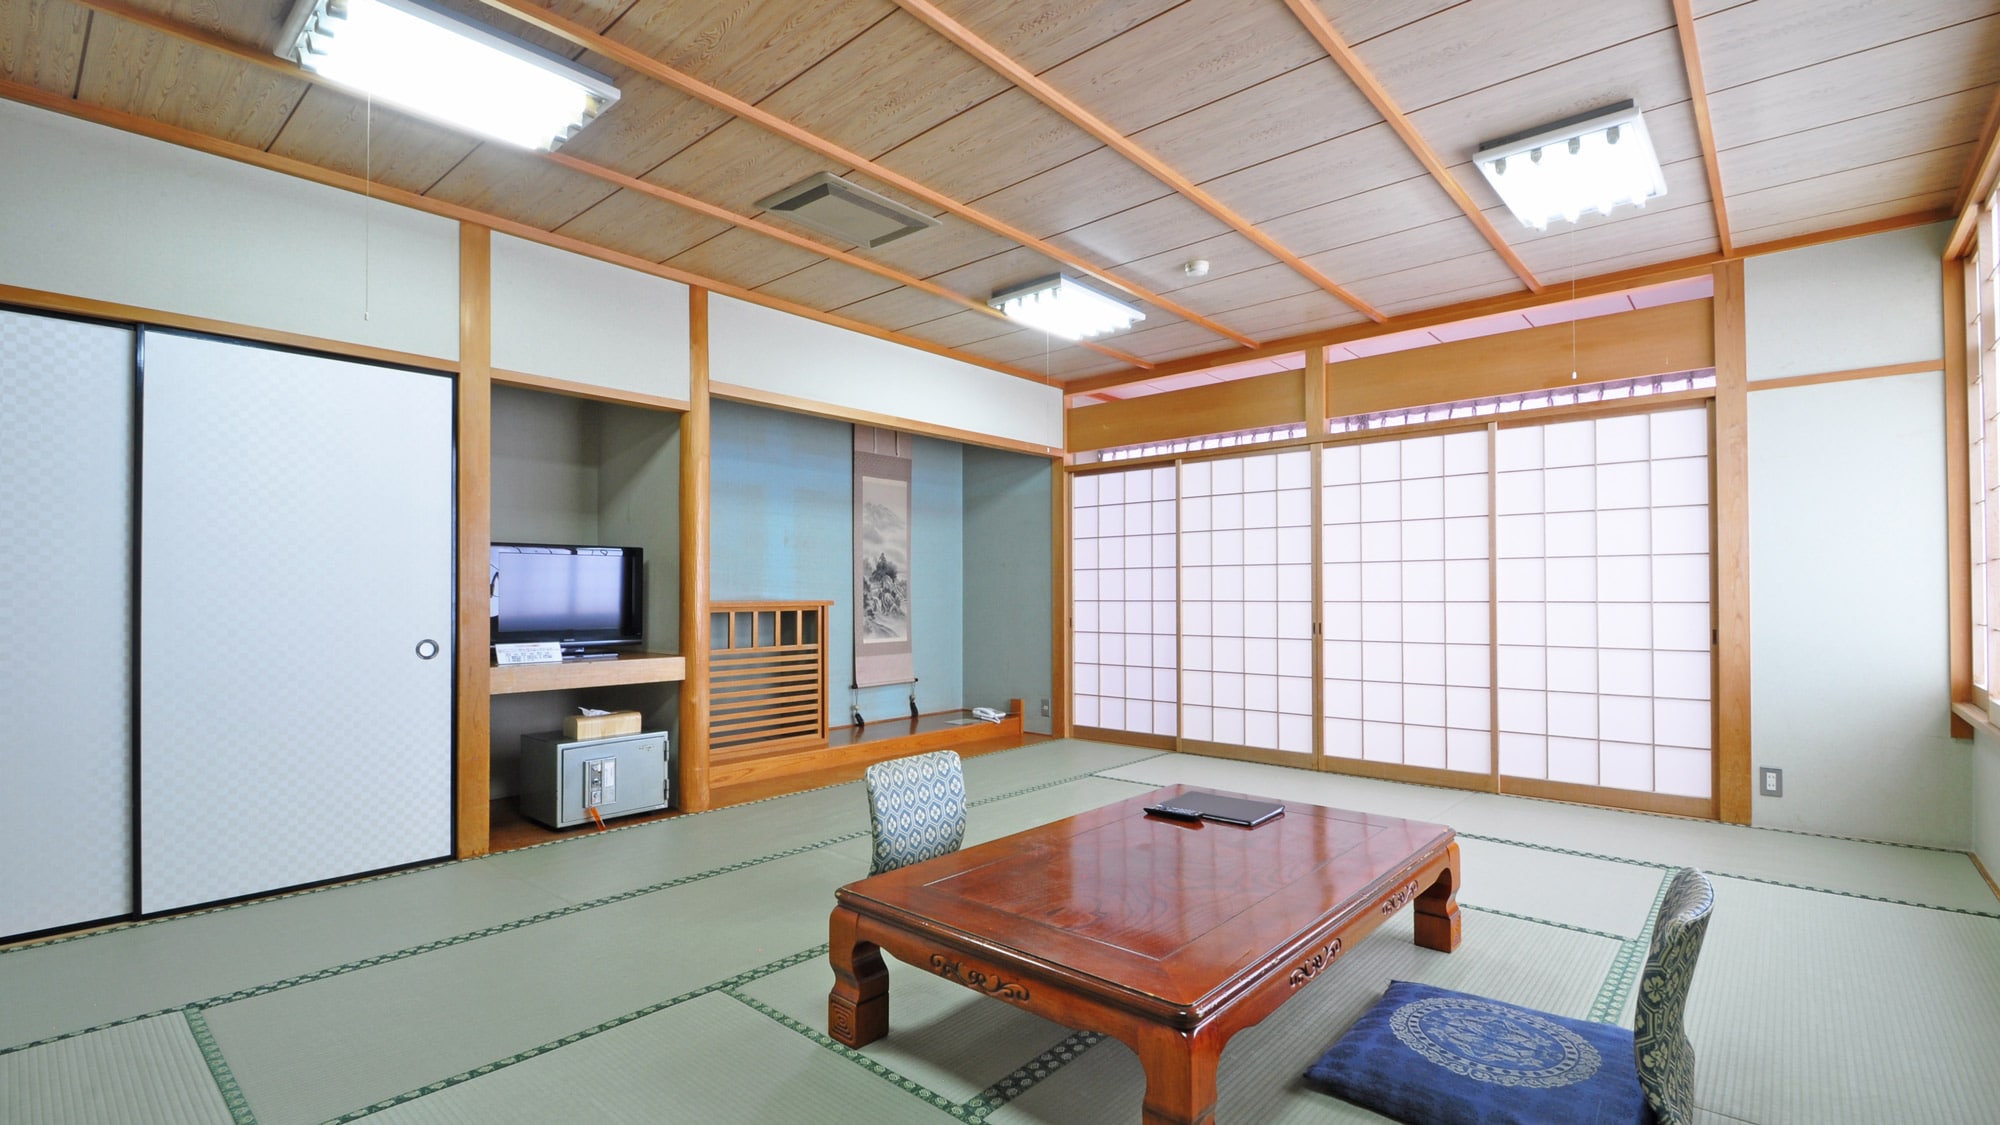 [Example of a Japanese-style room with 10 tatami mats and UB]